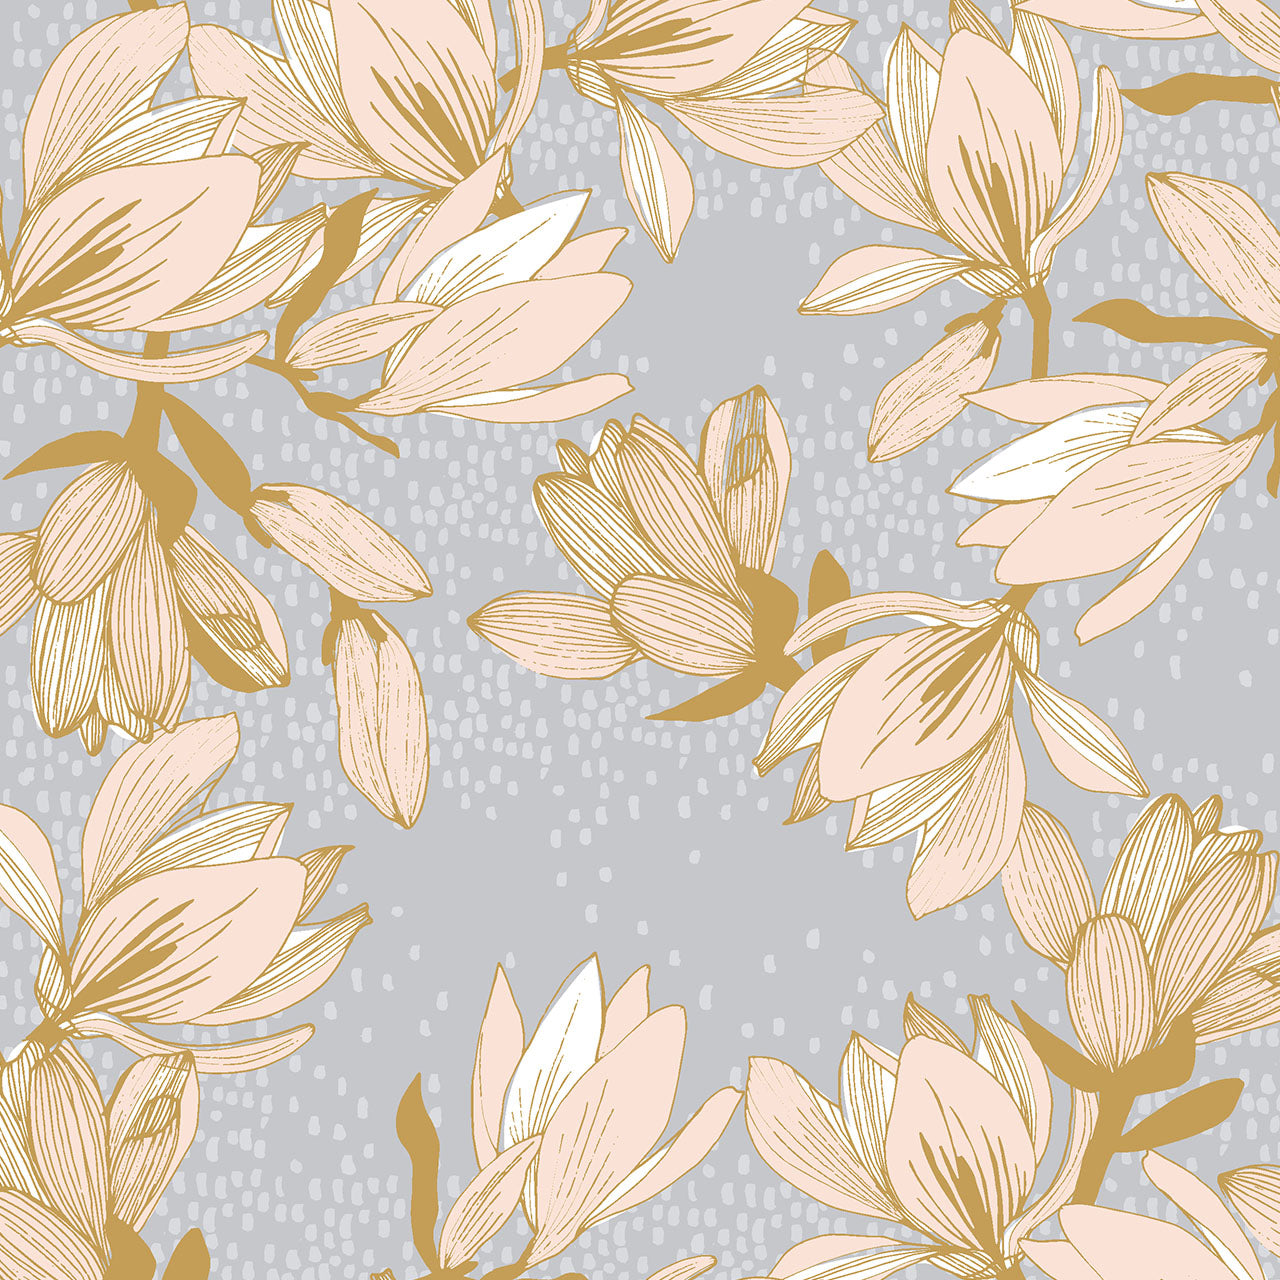 New Beginnings Quilt Fabric - Magnolia Branches in Pink/Gray - NEW 2042